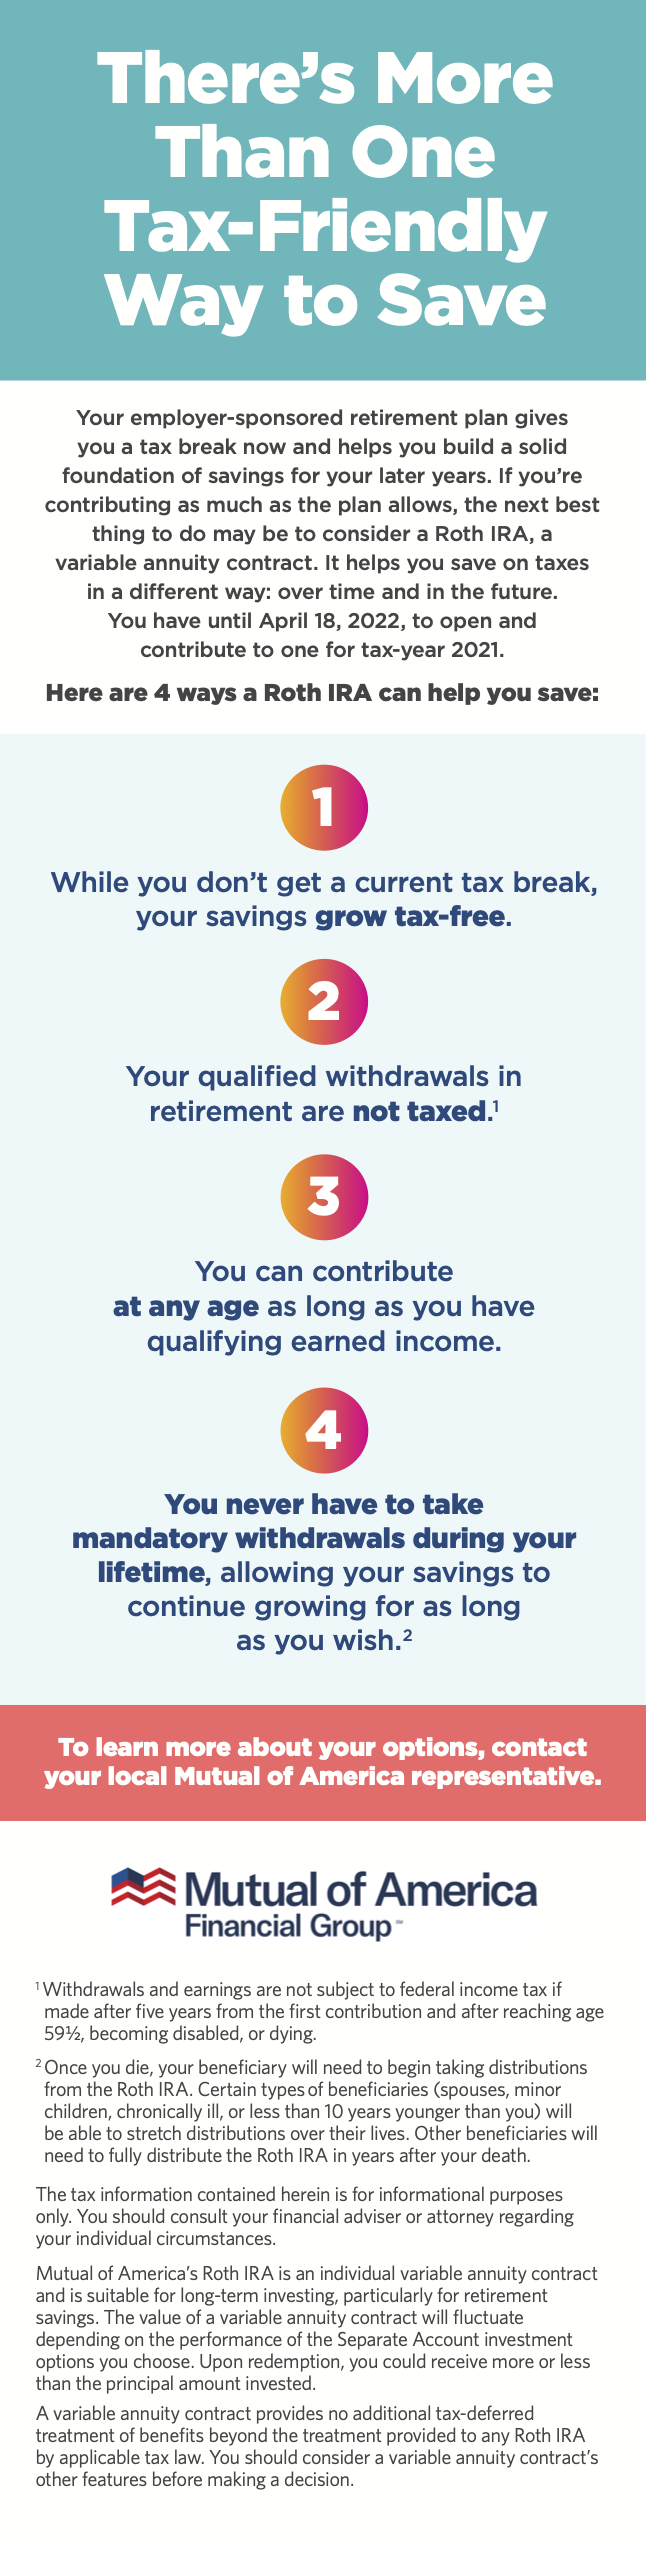 An infographic detailing ways to save with Roth IRA.  Here are 4 ways a Roth IRA can help you save:While you don’t get a current tax break, your savings grow tax-free. 2 Your qualified withdrawals in retirement are not taxed.1 3 You can contribute at any age as long as you have qualifying earned income. 4 You never have to take mandatory withdrawals during your lifetime, allowing your savings to continue growing for as long as you wish.